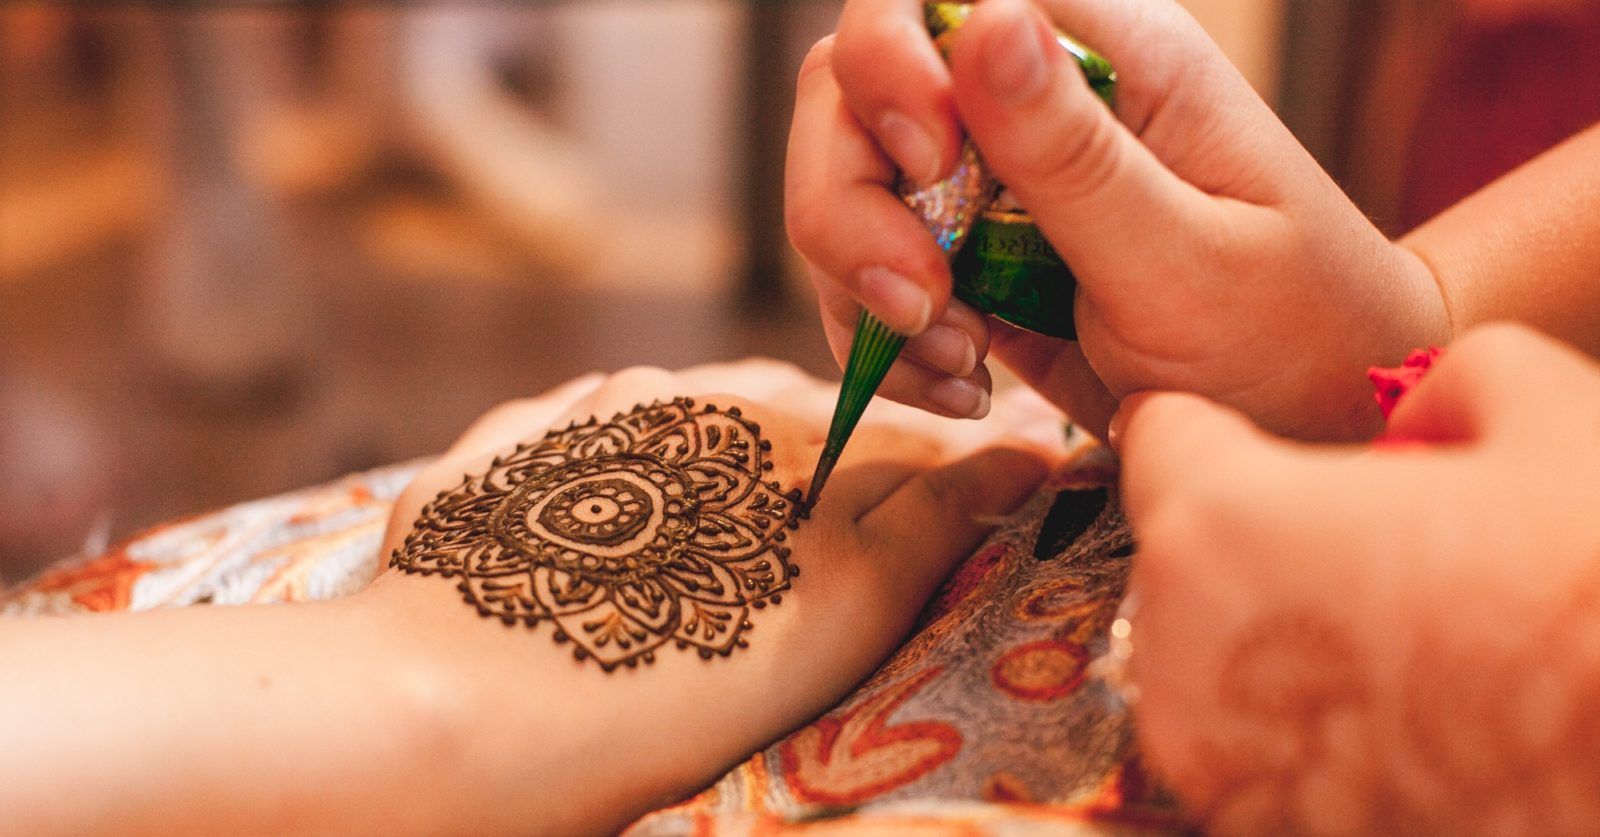 Image Of Unrecognised Man Showing Hand With Henna Mehndi Paste Tattoo  Design Common To Indian Subcontinent